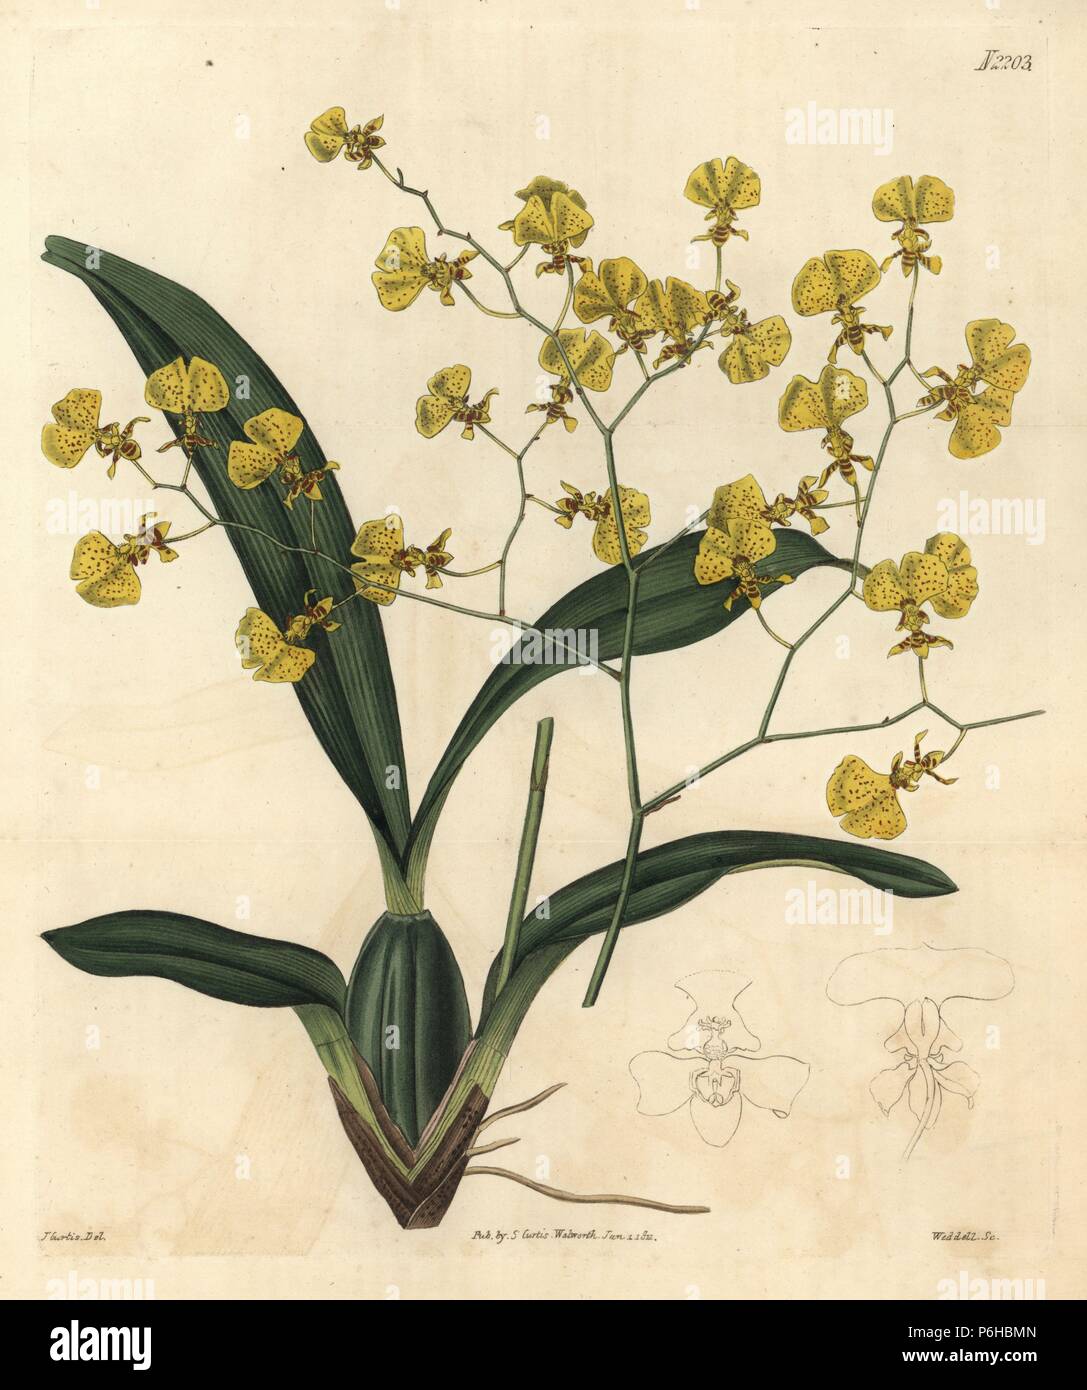 Gomesa flexuosa orchid (Zig-zag oncidium, Oncidium flexuosum). Handcoloured copperplate engraving by Weddell after a drawing by John Curtis for Samuel Curtis' continuation of William Curtis' Botanical Magazine, London, 1820. Stock Photo